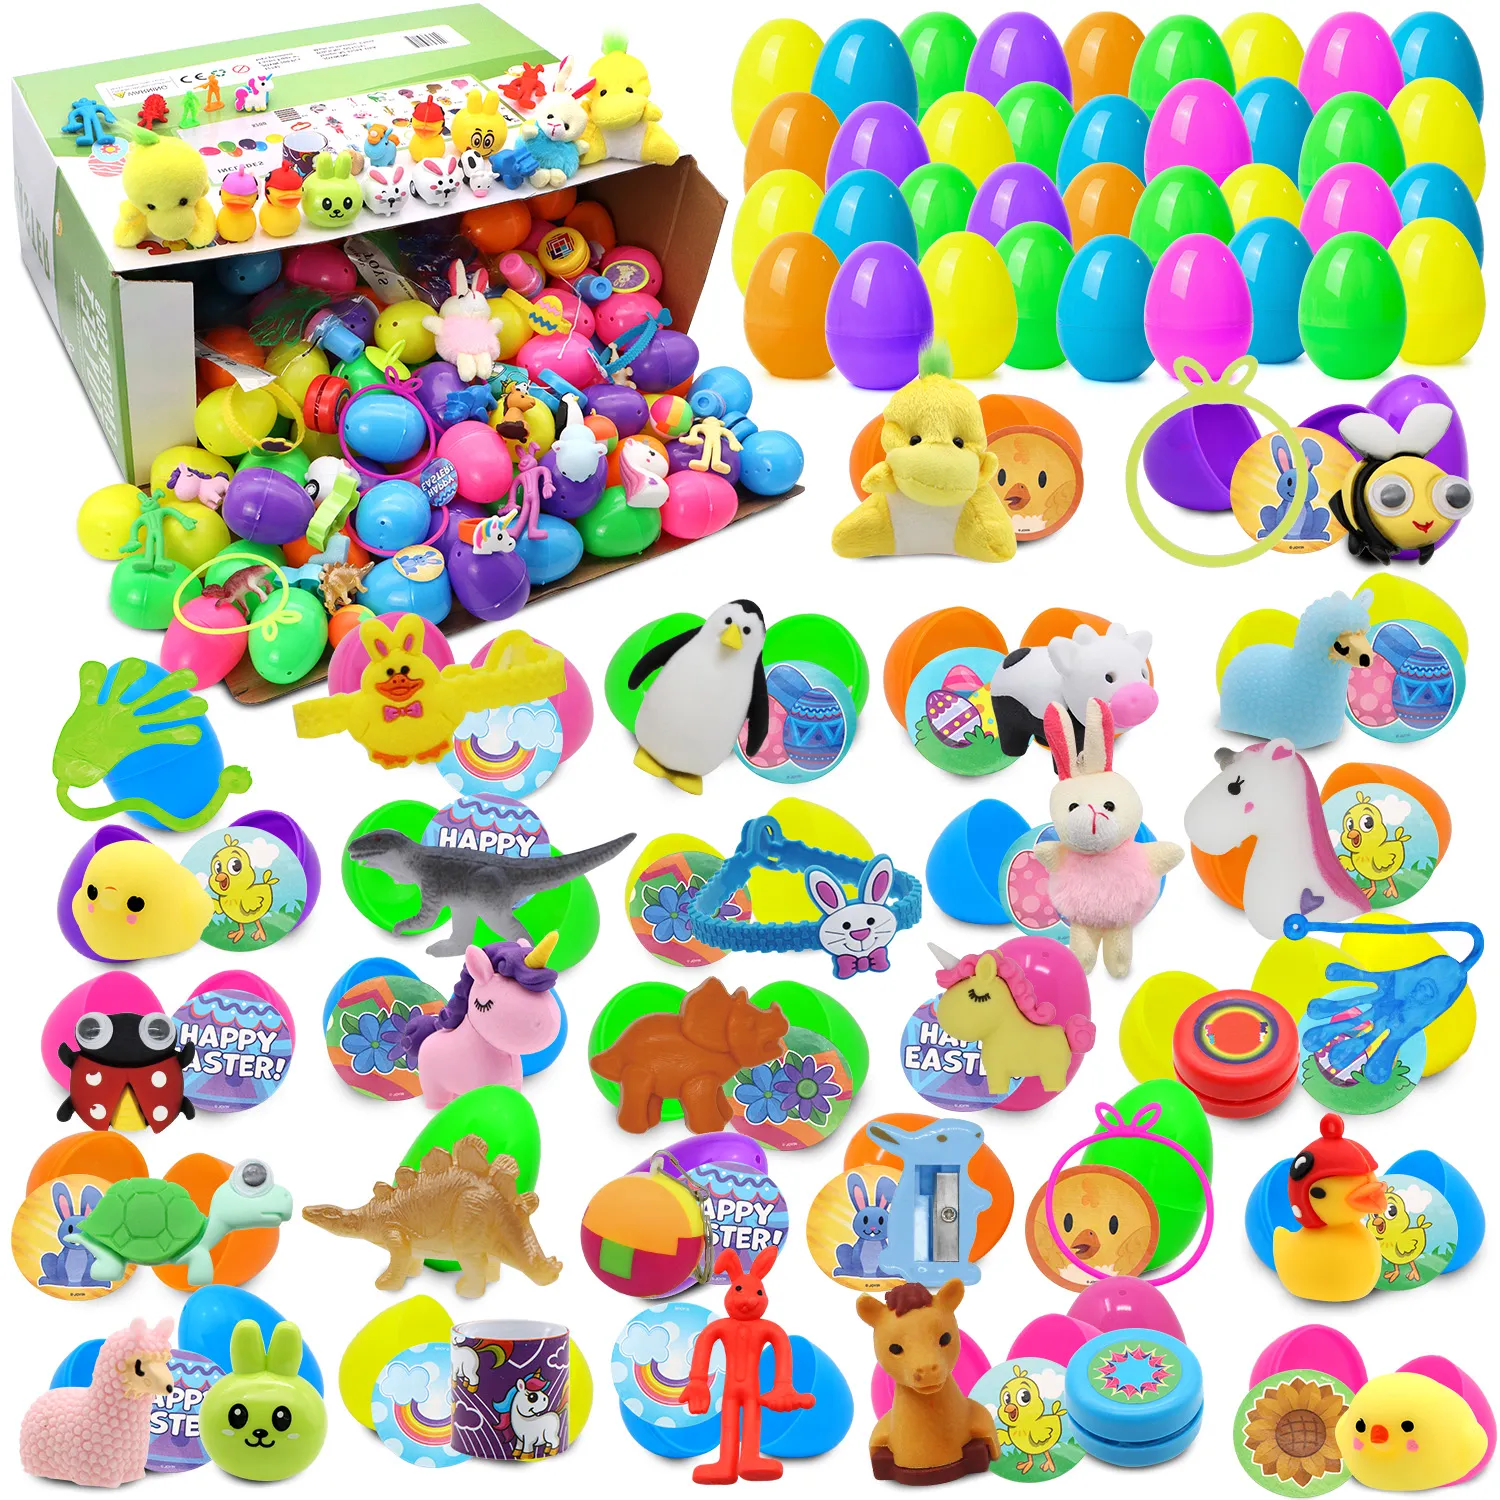 You are currently viewing Can I buy pre-filled Easter eggs with religious or spiritual items?